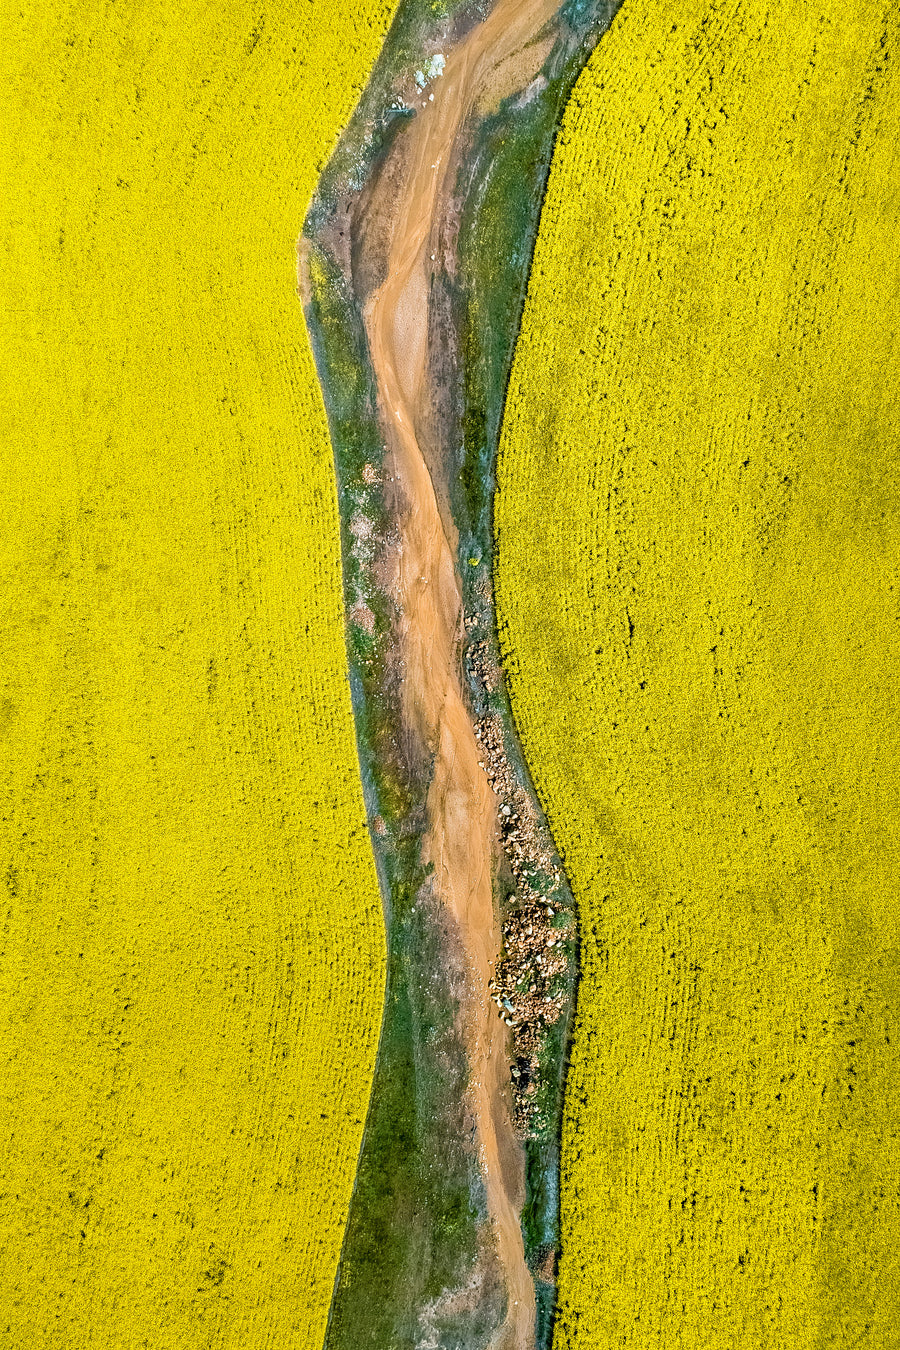 The yellow canola fields around York, Mid Western Australia.  Abstract aerial photography by Christian Fletcher